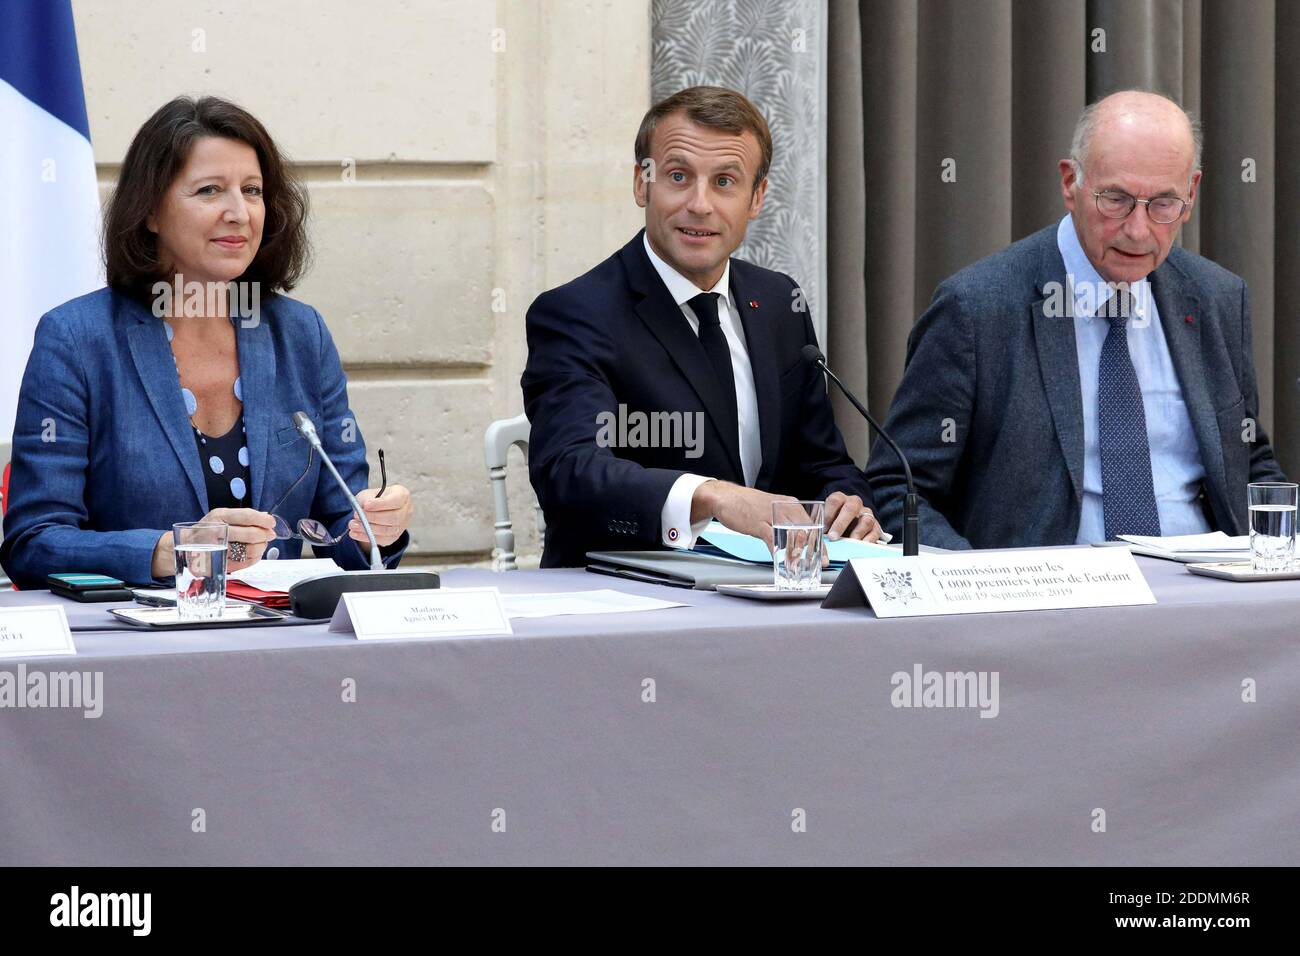 French President Emmanuel Macron inaugurates the Commission on 'the child's first 1000 days' (les 1000 premiers jours de l'enfant) with President of the Commission French neuropsychiatrist Boris Cyrulnik and French Minister for Solidarity and Health Agnes Buzyn, at the Elysee palace in Paris, on September 19, 2019. Photo by Stephane Lemouton/pool/ABACAPRESS.COM Stock Photo